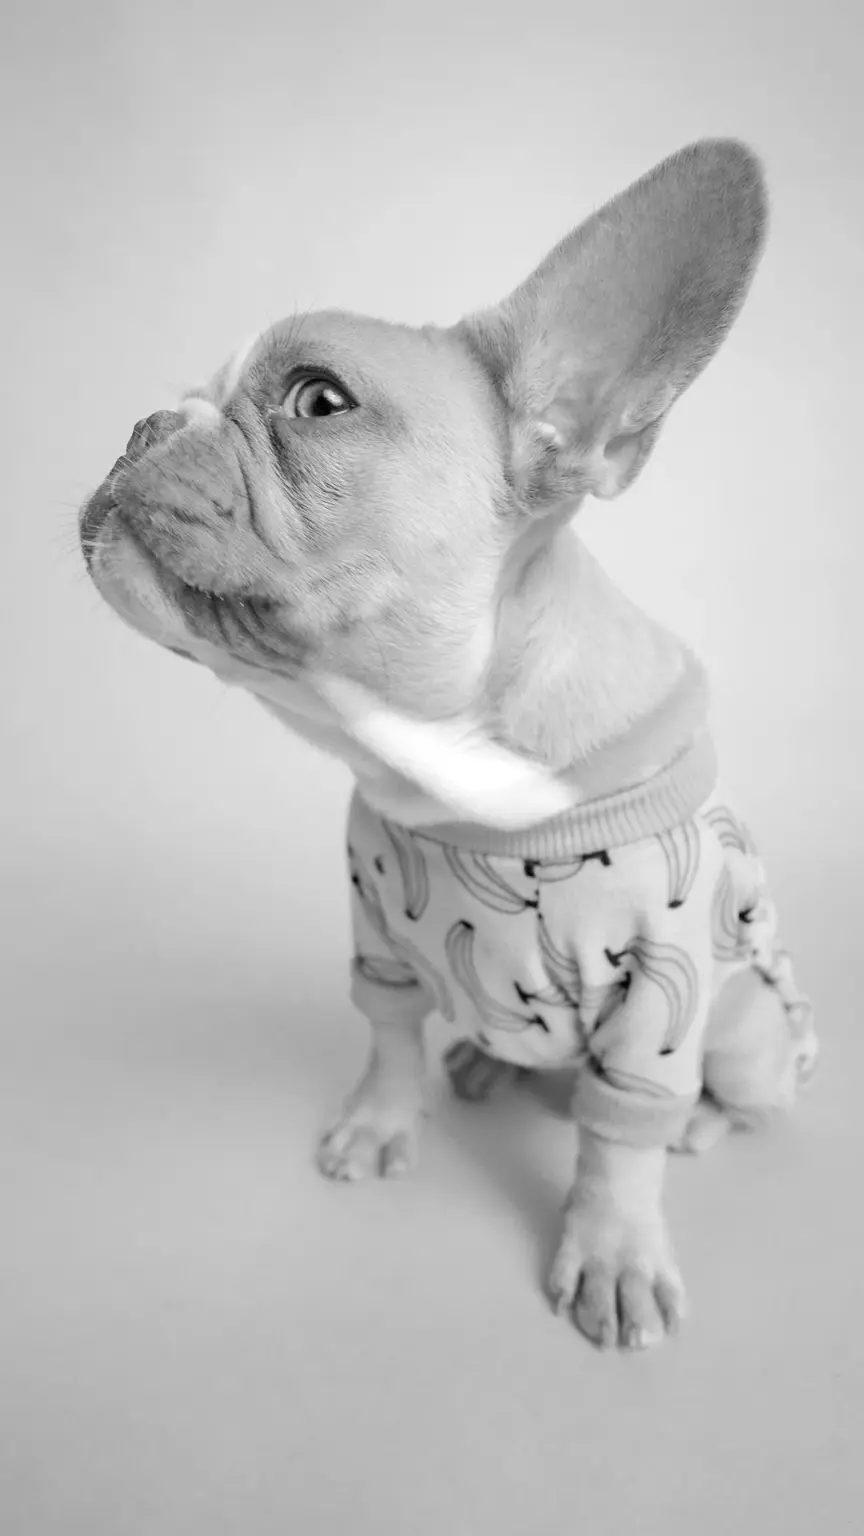 french bulldog posing for a photo